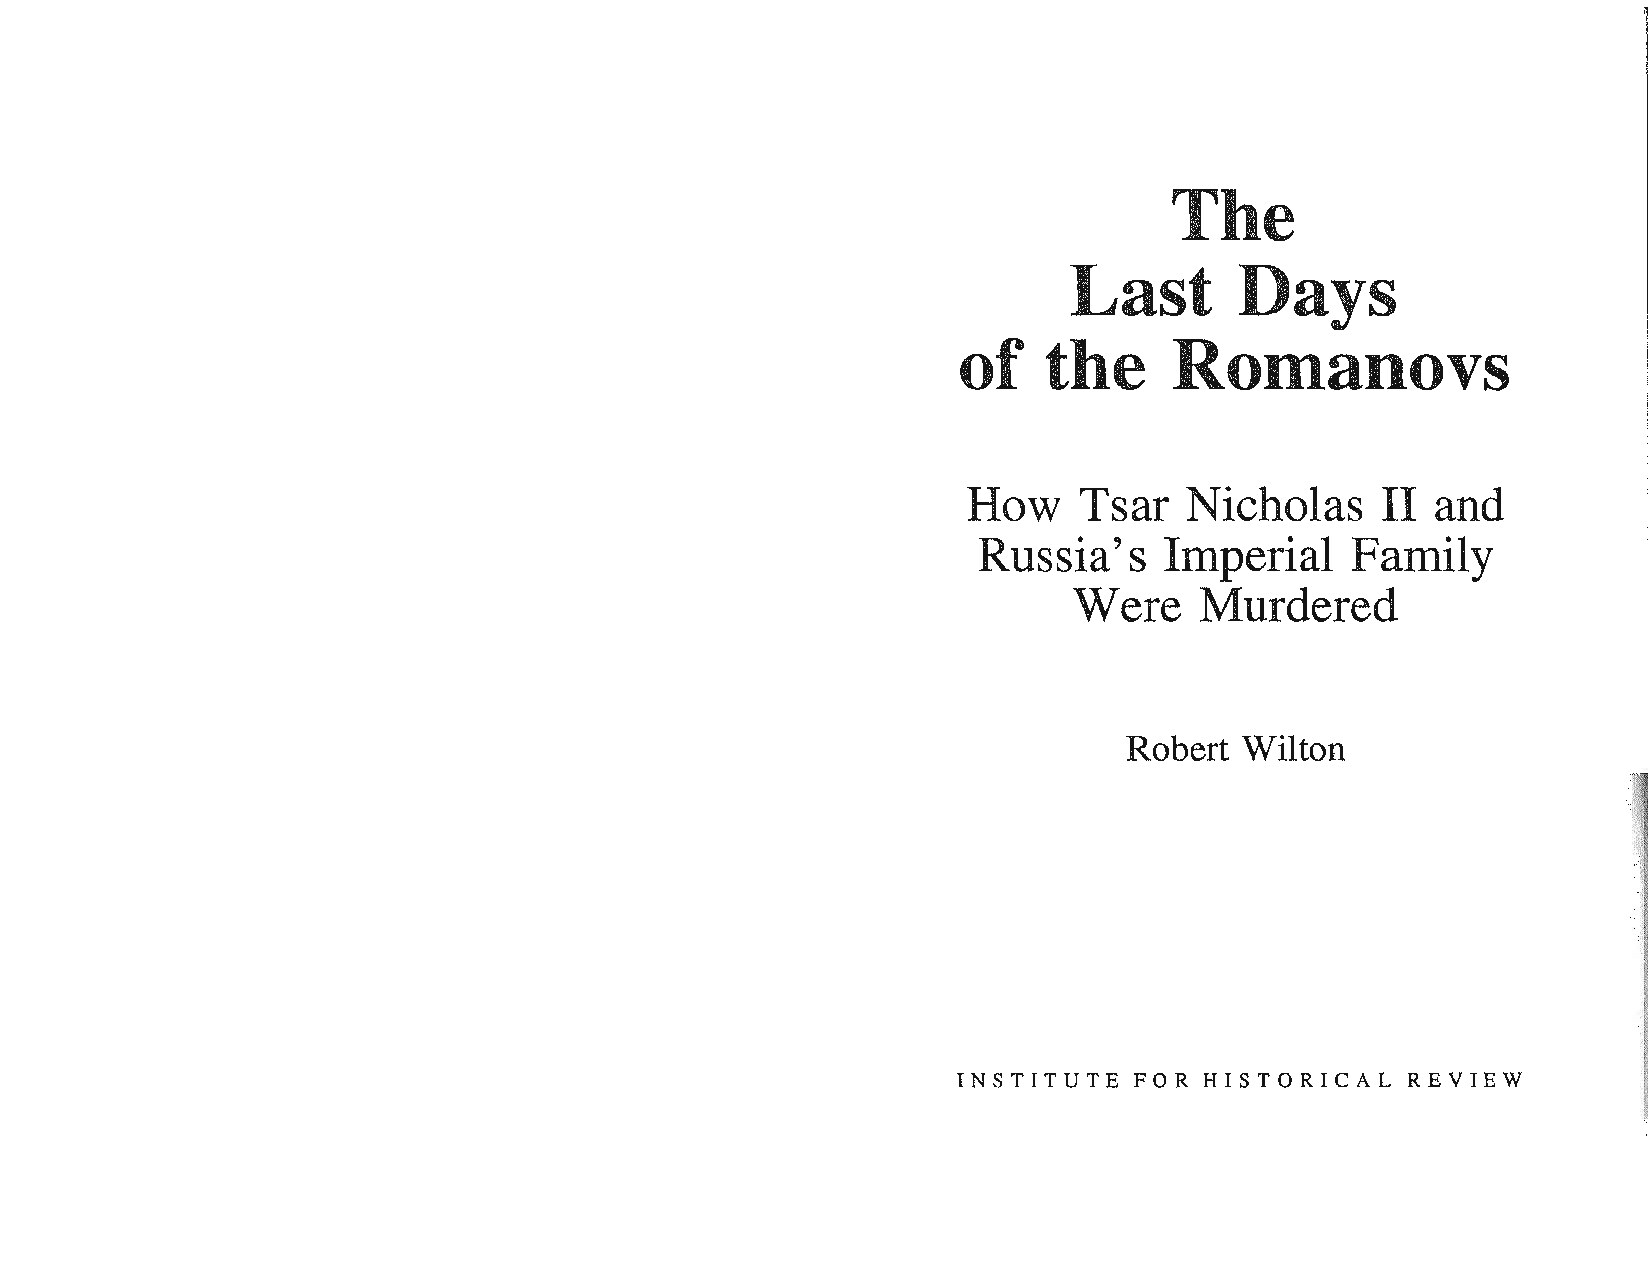 Wilton, Robert; The Last Days Of The Romanovs - How Tsar Nicholas II And Russias Imperial Family Were Murdered